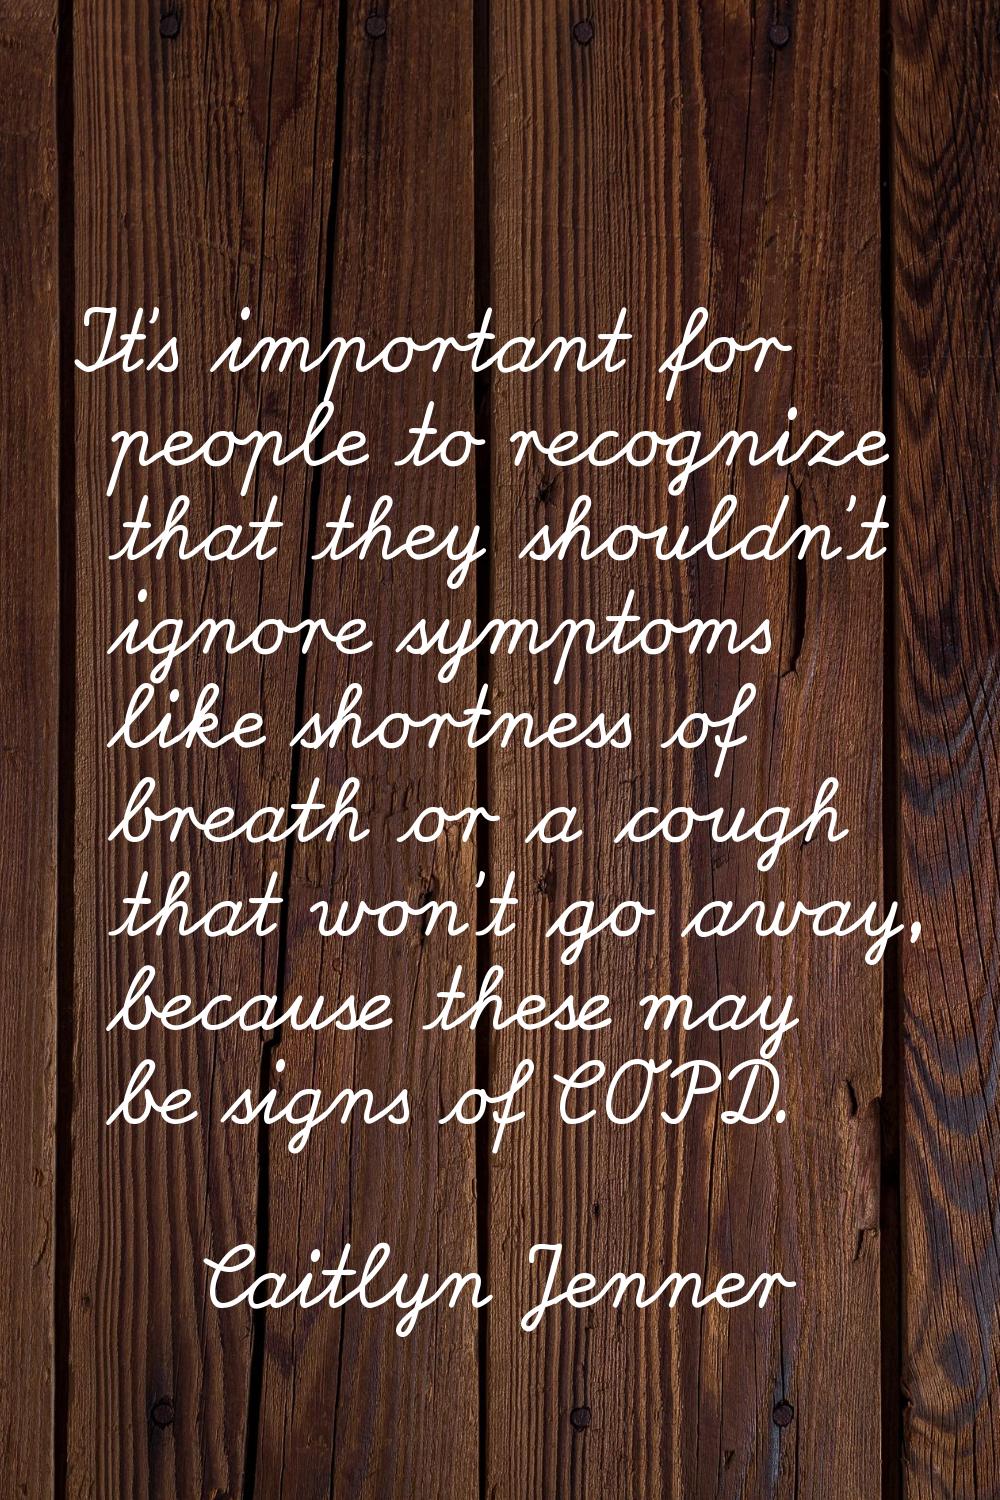 It's important for people to recognize that they shouldn't ignore symptoms like shortness of breath